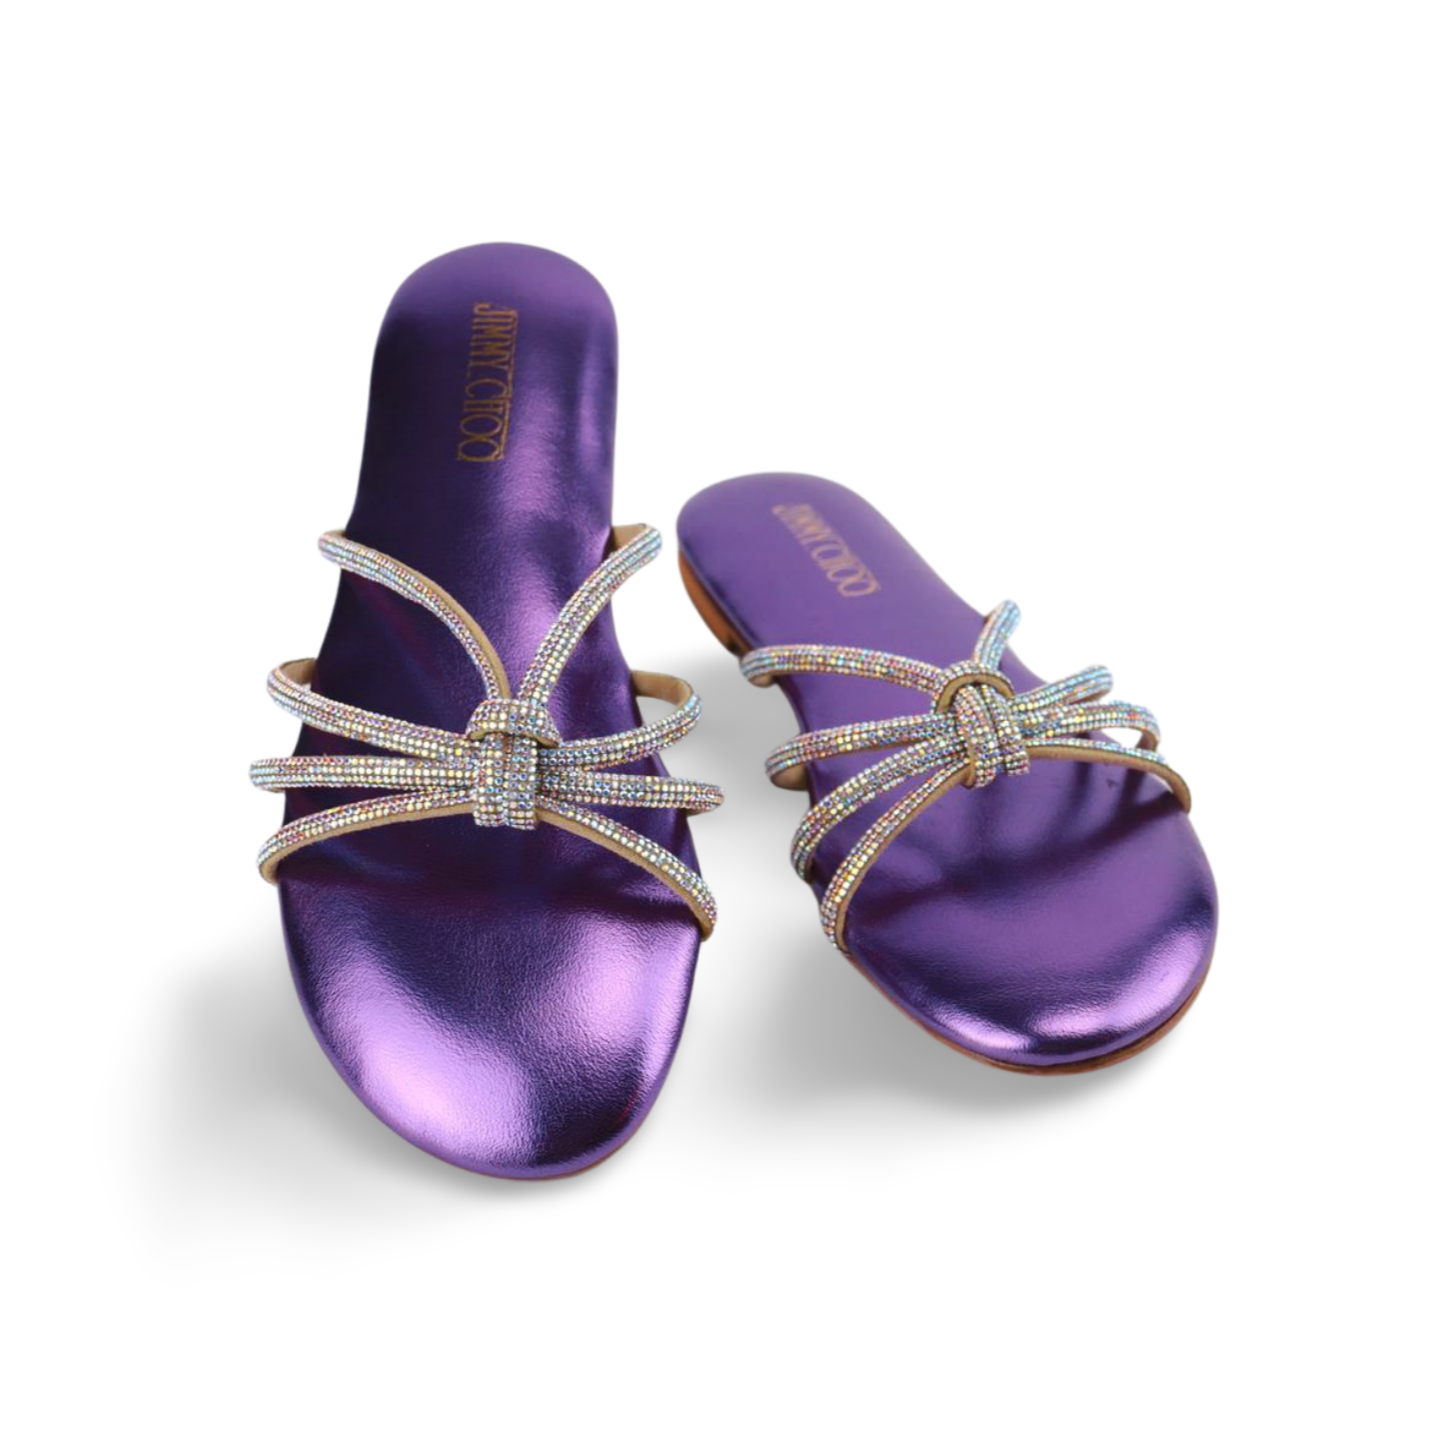 Women's Sandals with Rhinestones and Bows